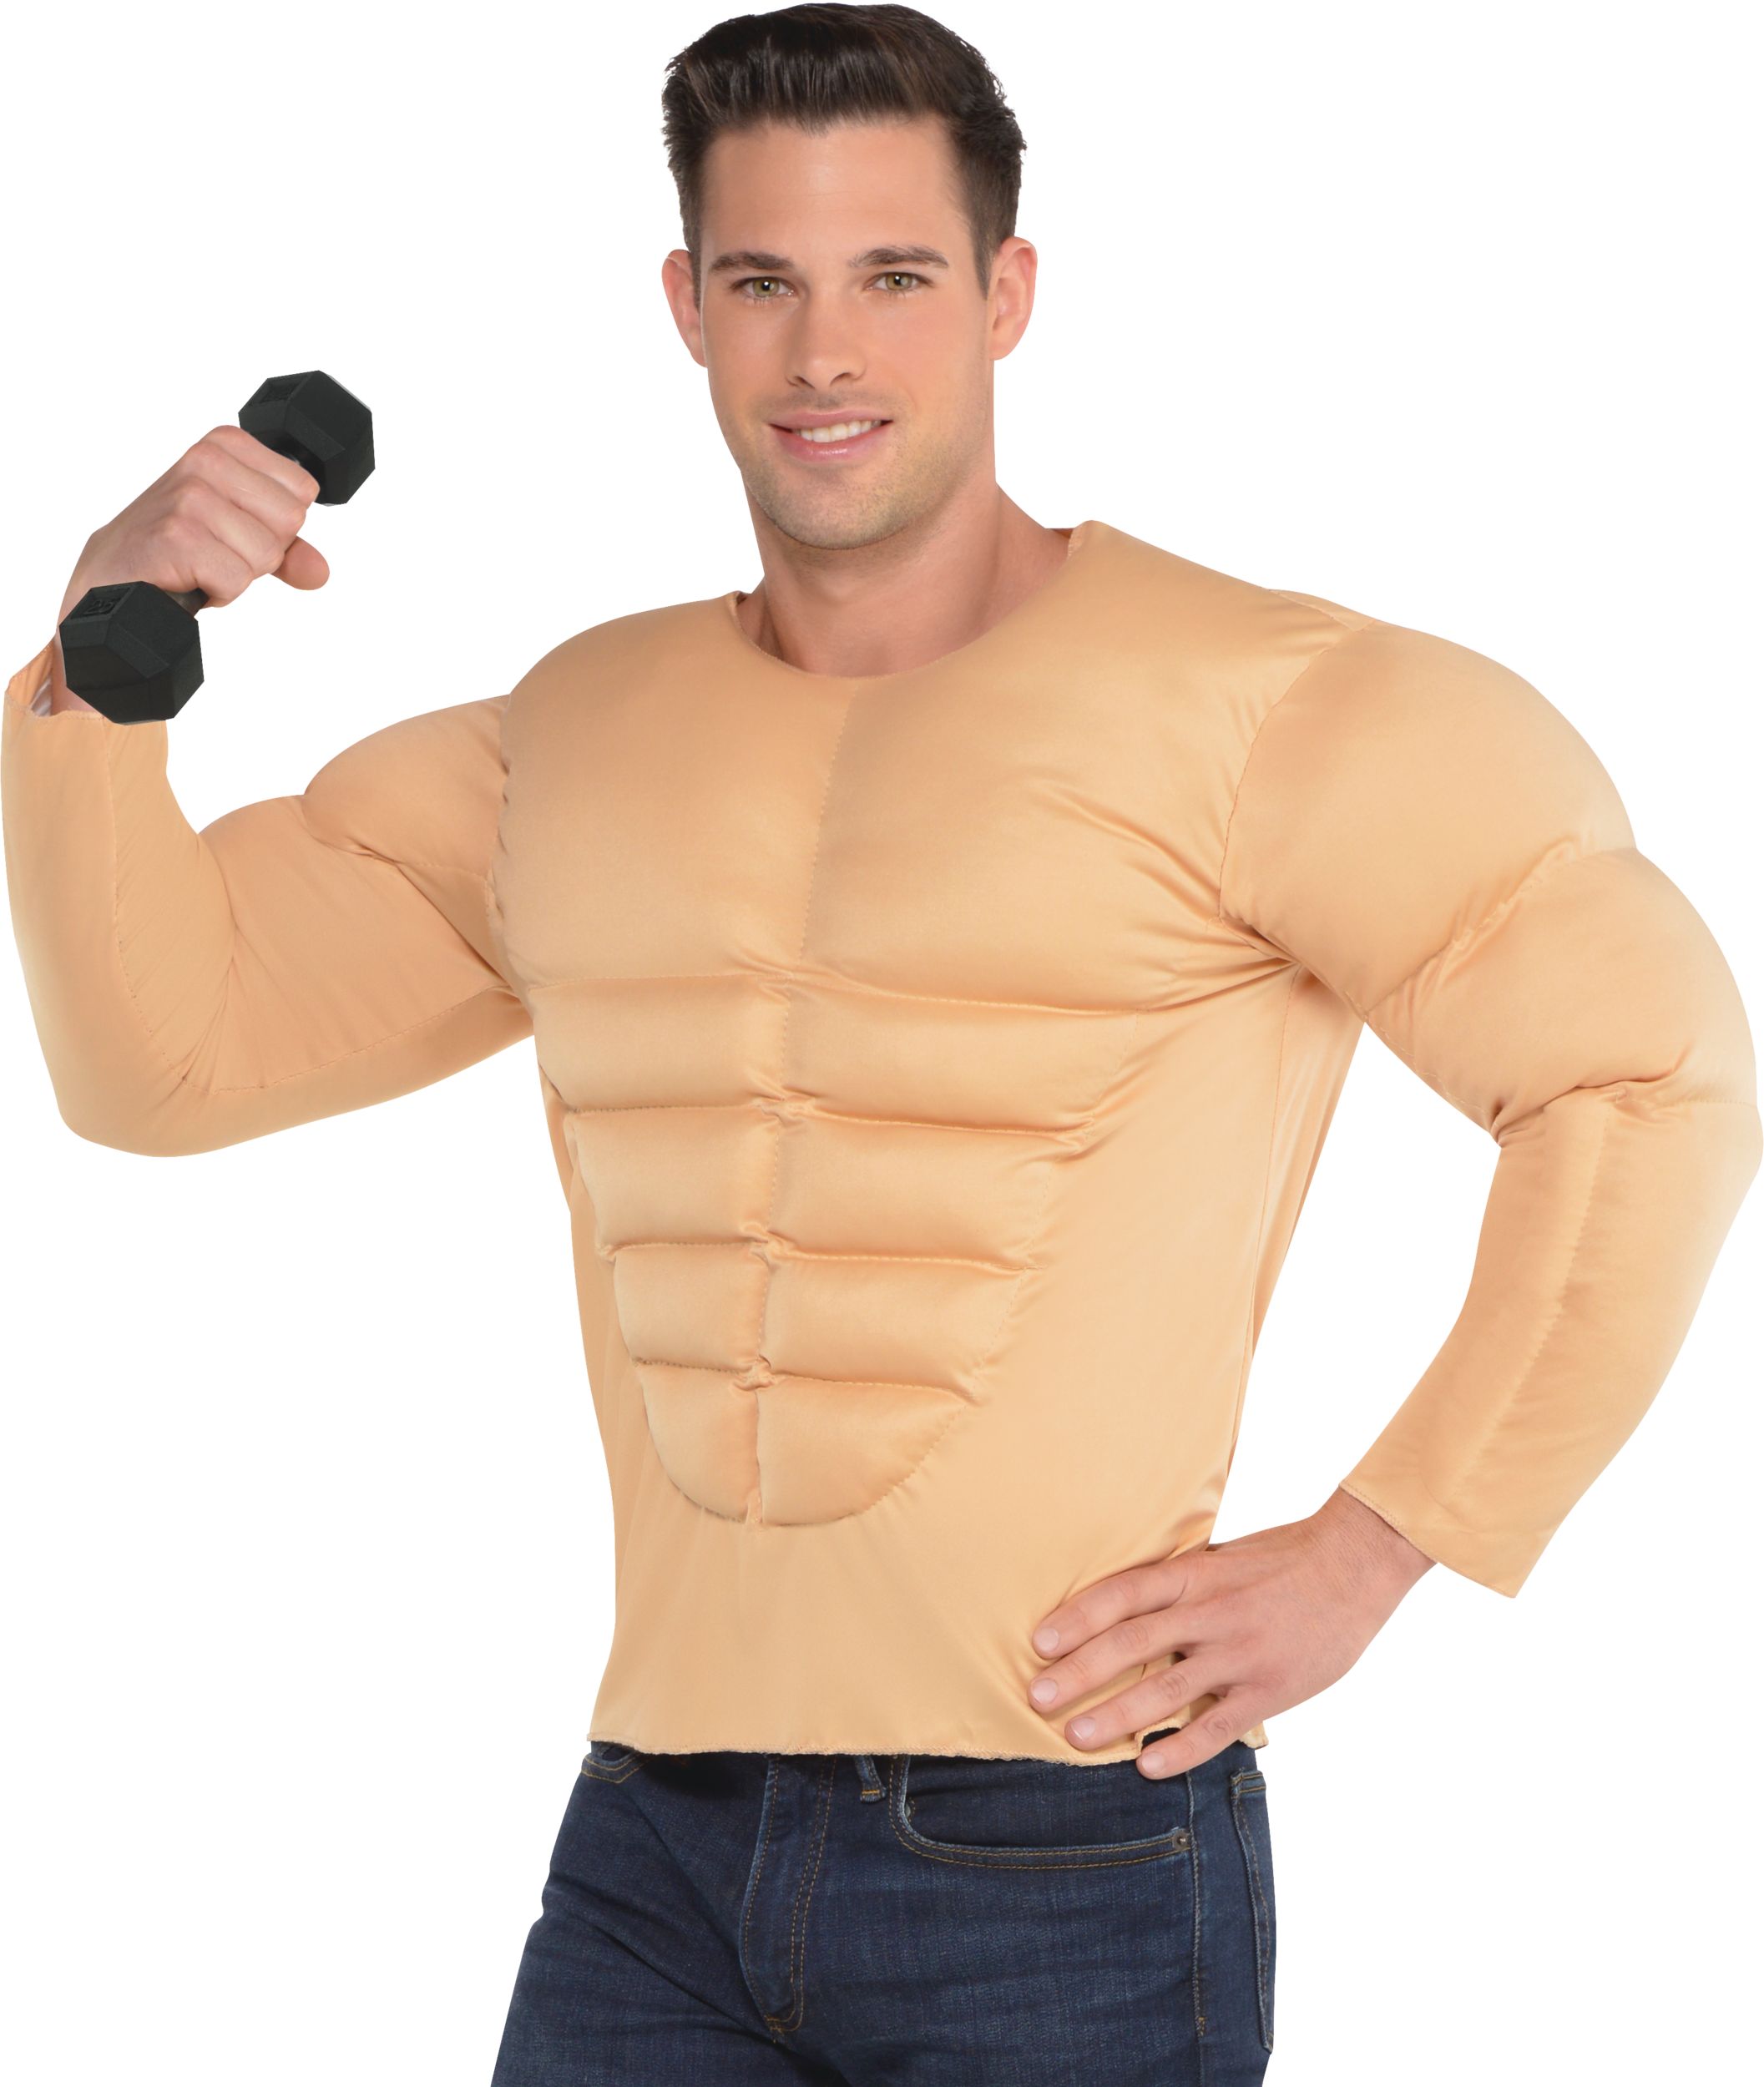 Men Muscle Shirt Suit Kids Fake Muscle Shirt Bodybuilder Halloween Costume  Accessory for Padded Makeup Props